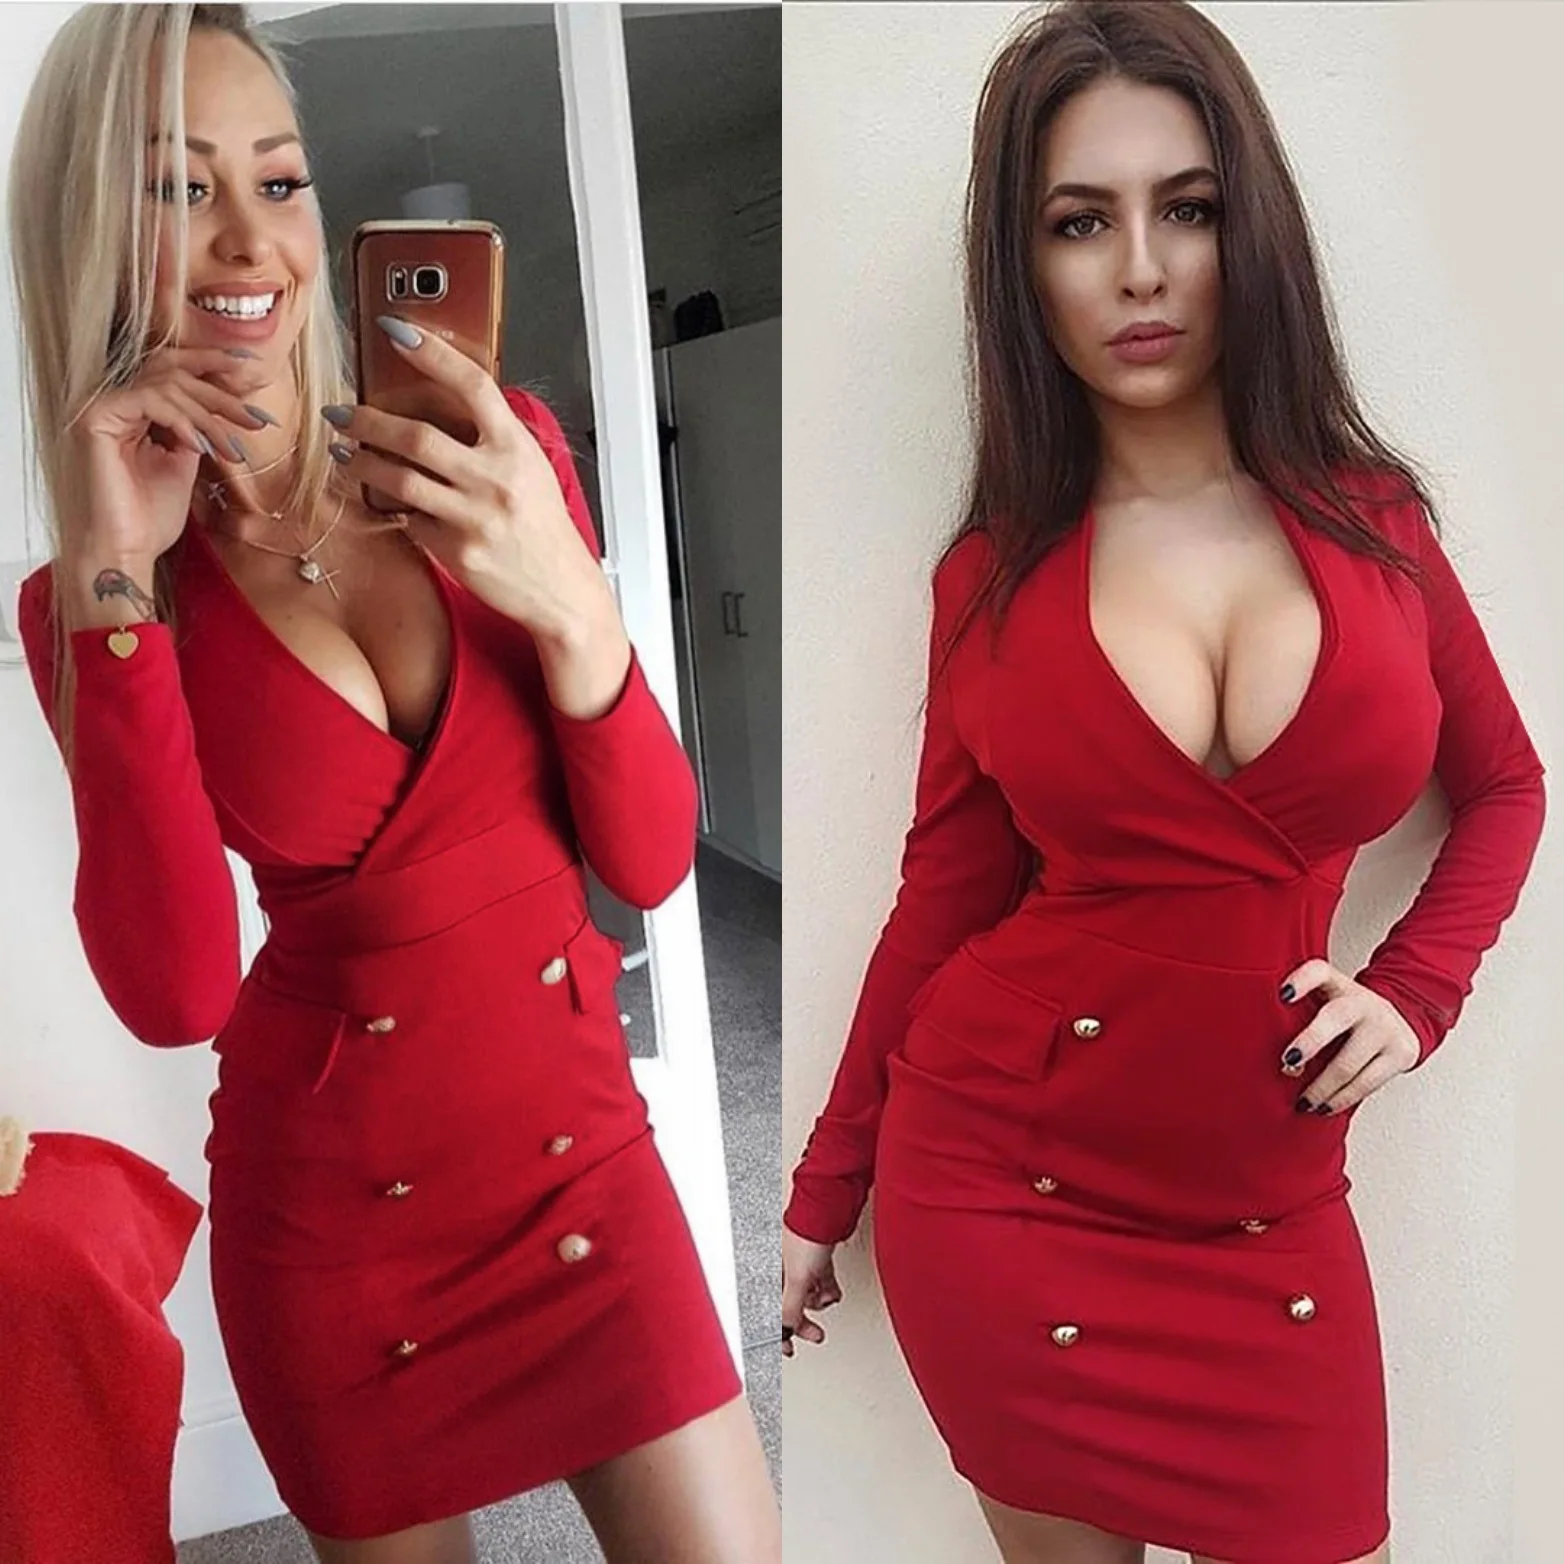 

2019 mama style new arrival v-neck solid new dress above knee Mini button pockets sheath slim sexy comfortable female dress